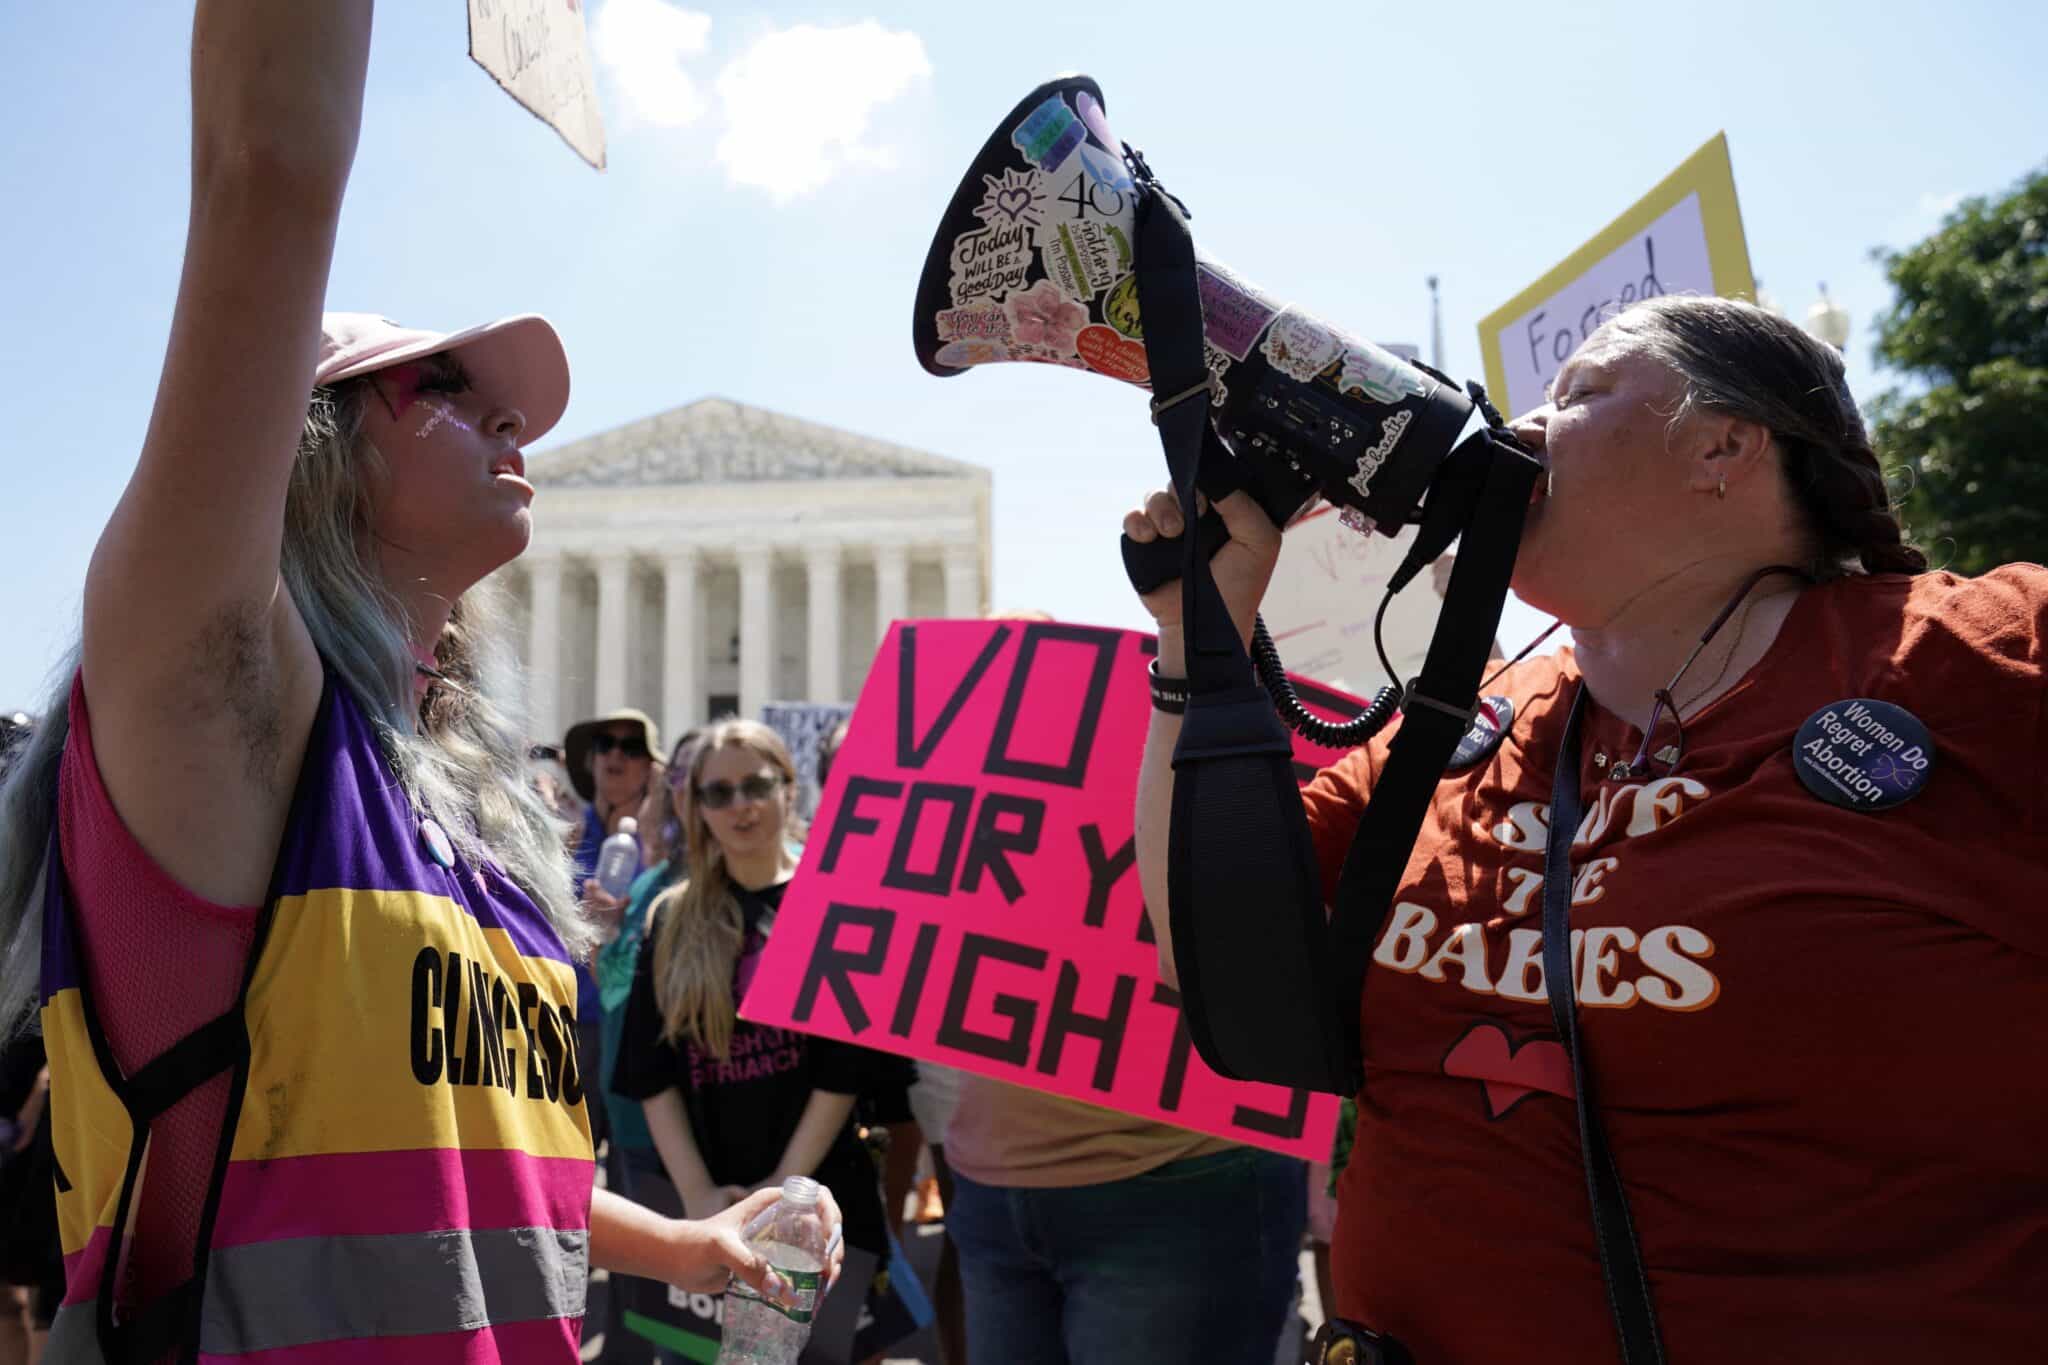 Demonstrators protest outside the U.S. Supreme Court in Washington June 25, 2022, the day after the high court ruled in the Dobbs v Women's Health Organization abortion case, overturning the landmark Roe v. Wade abortion decision. (OSV News photo/Elizabeth Frantz, Reuters)